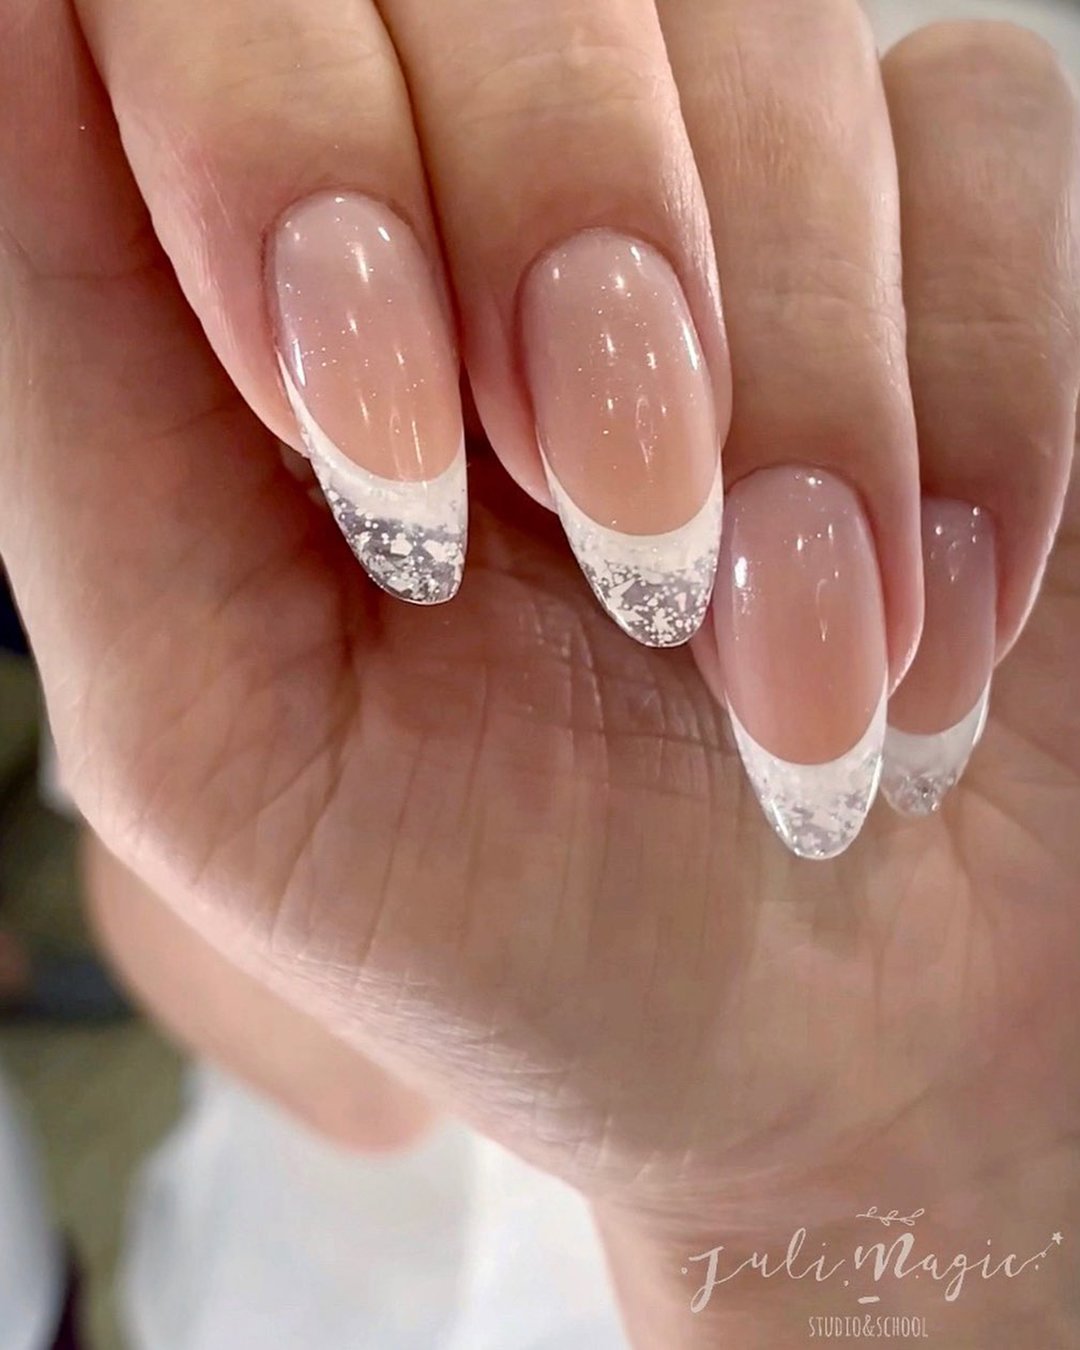 nail ideas for wedding transparent french manicure juli.magic